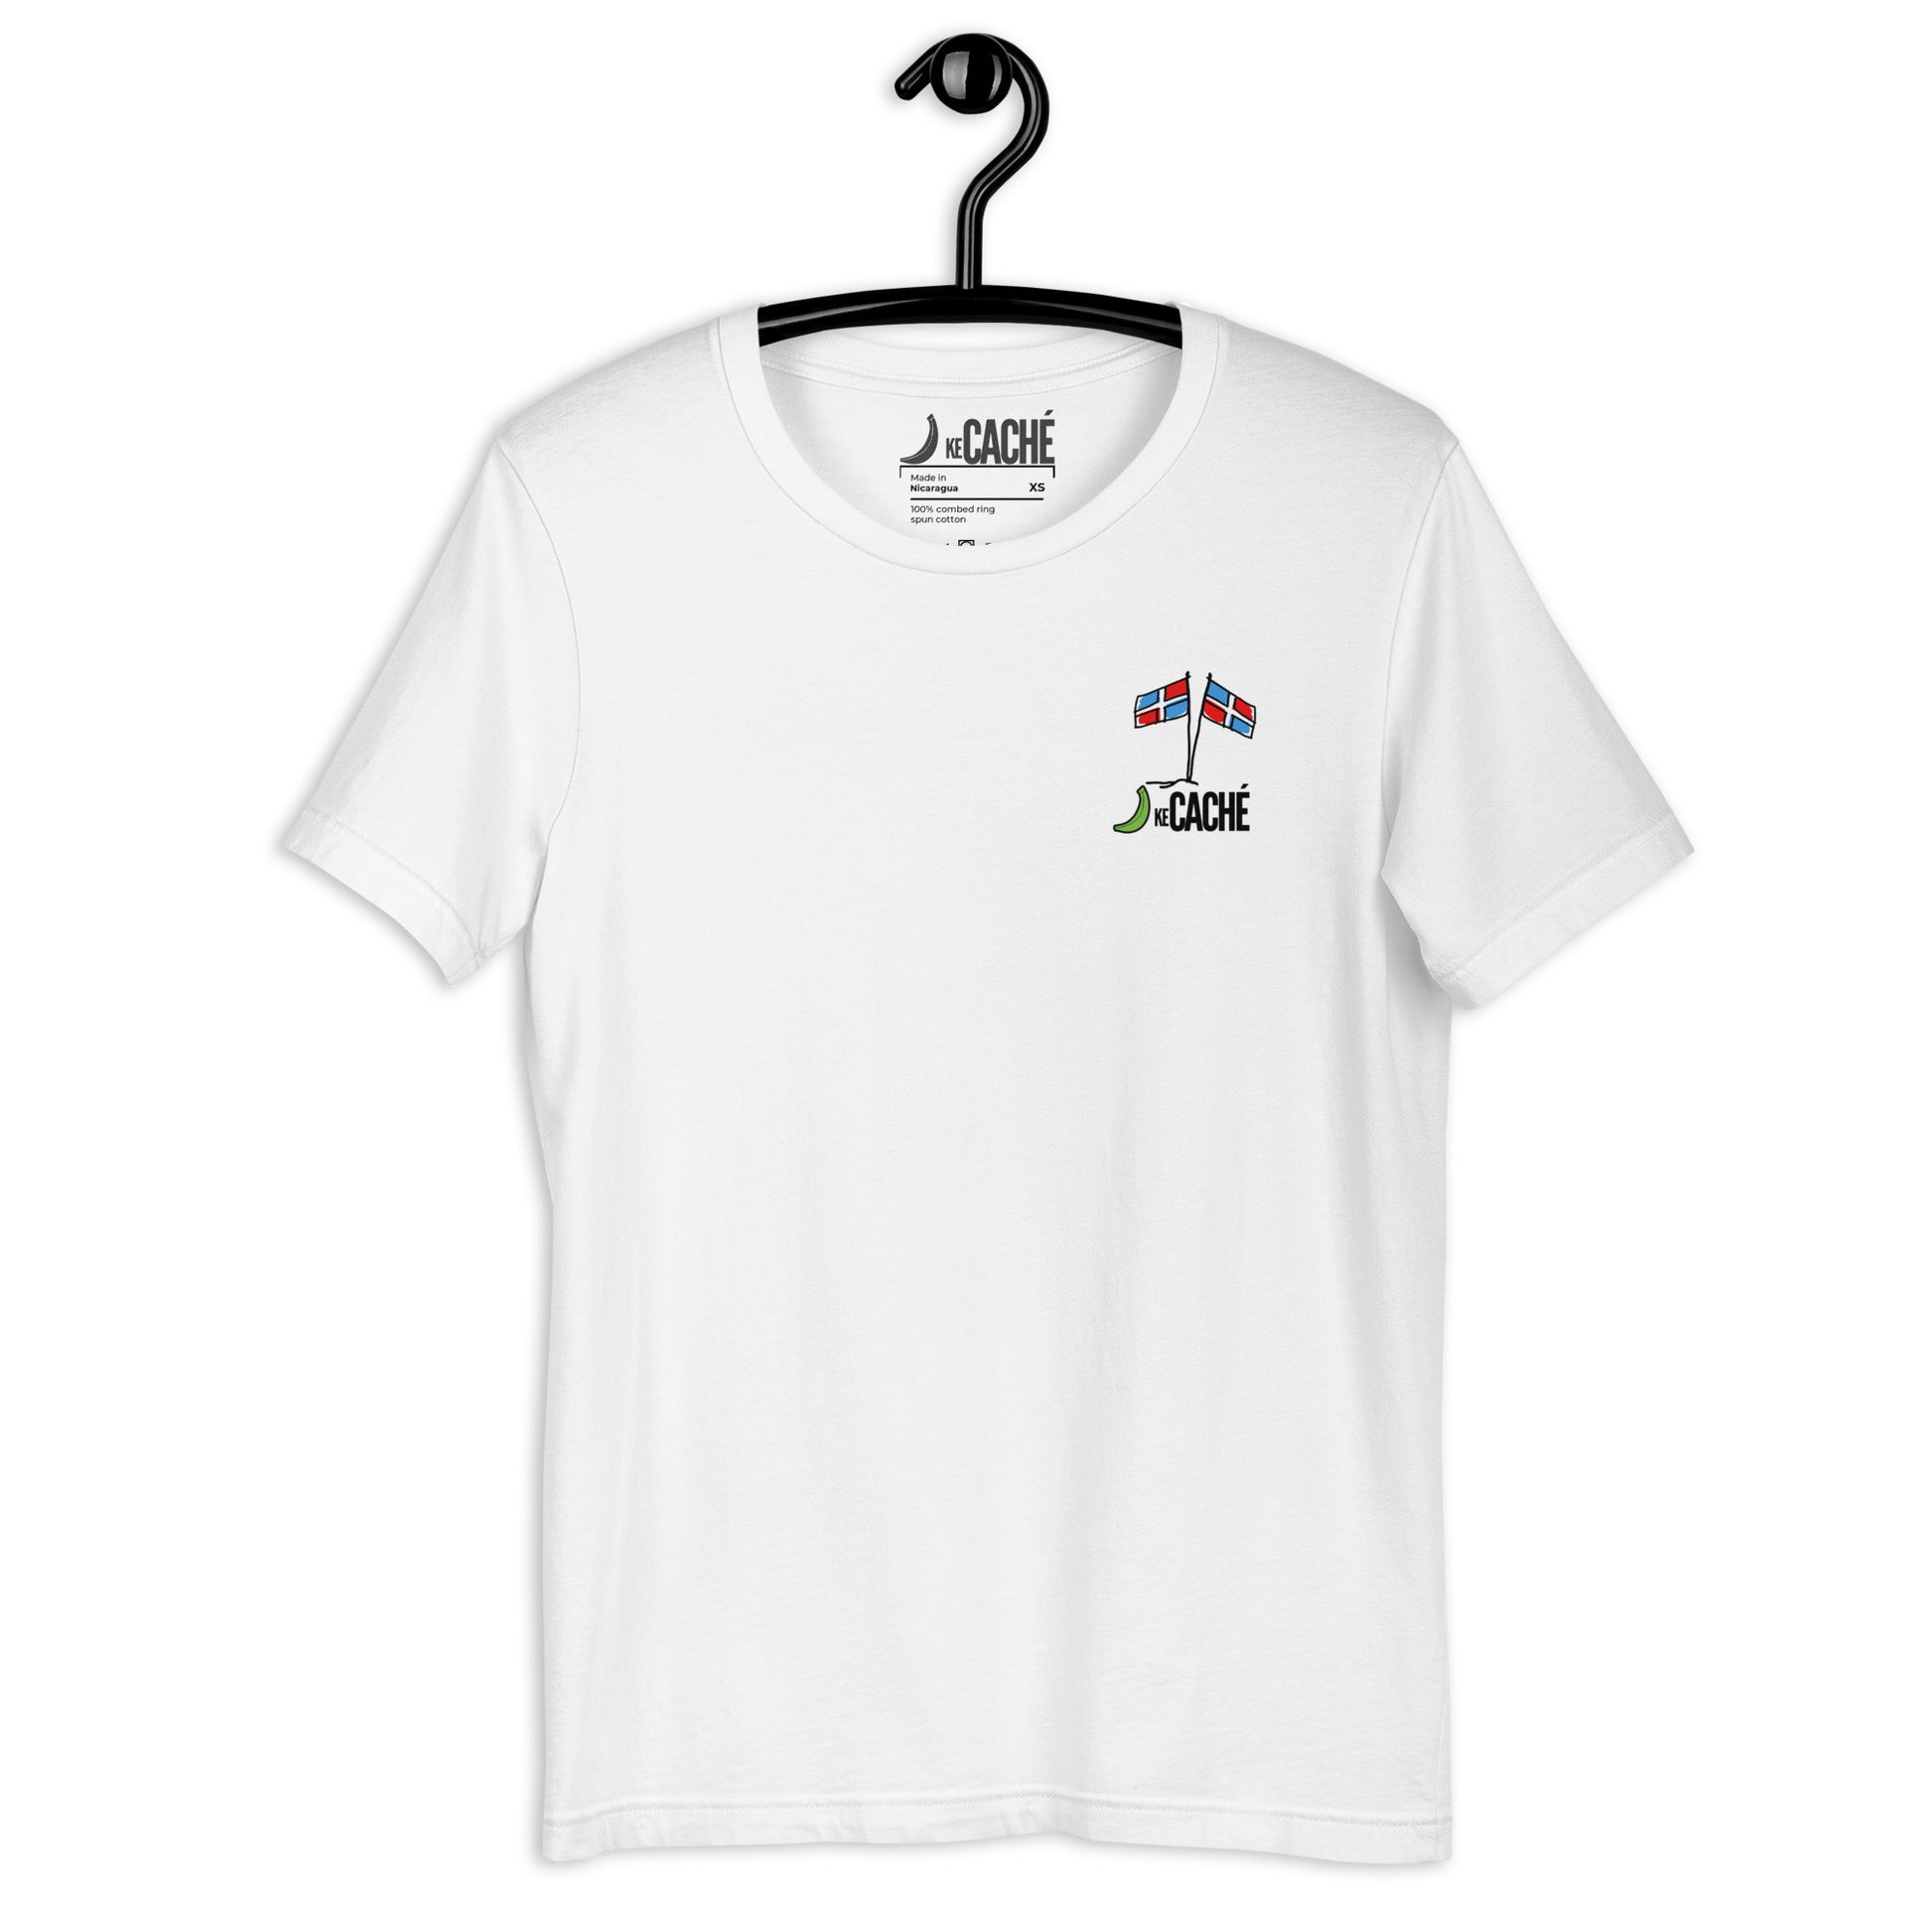 White tee with Dominican flag and KeCaché logo on the front.